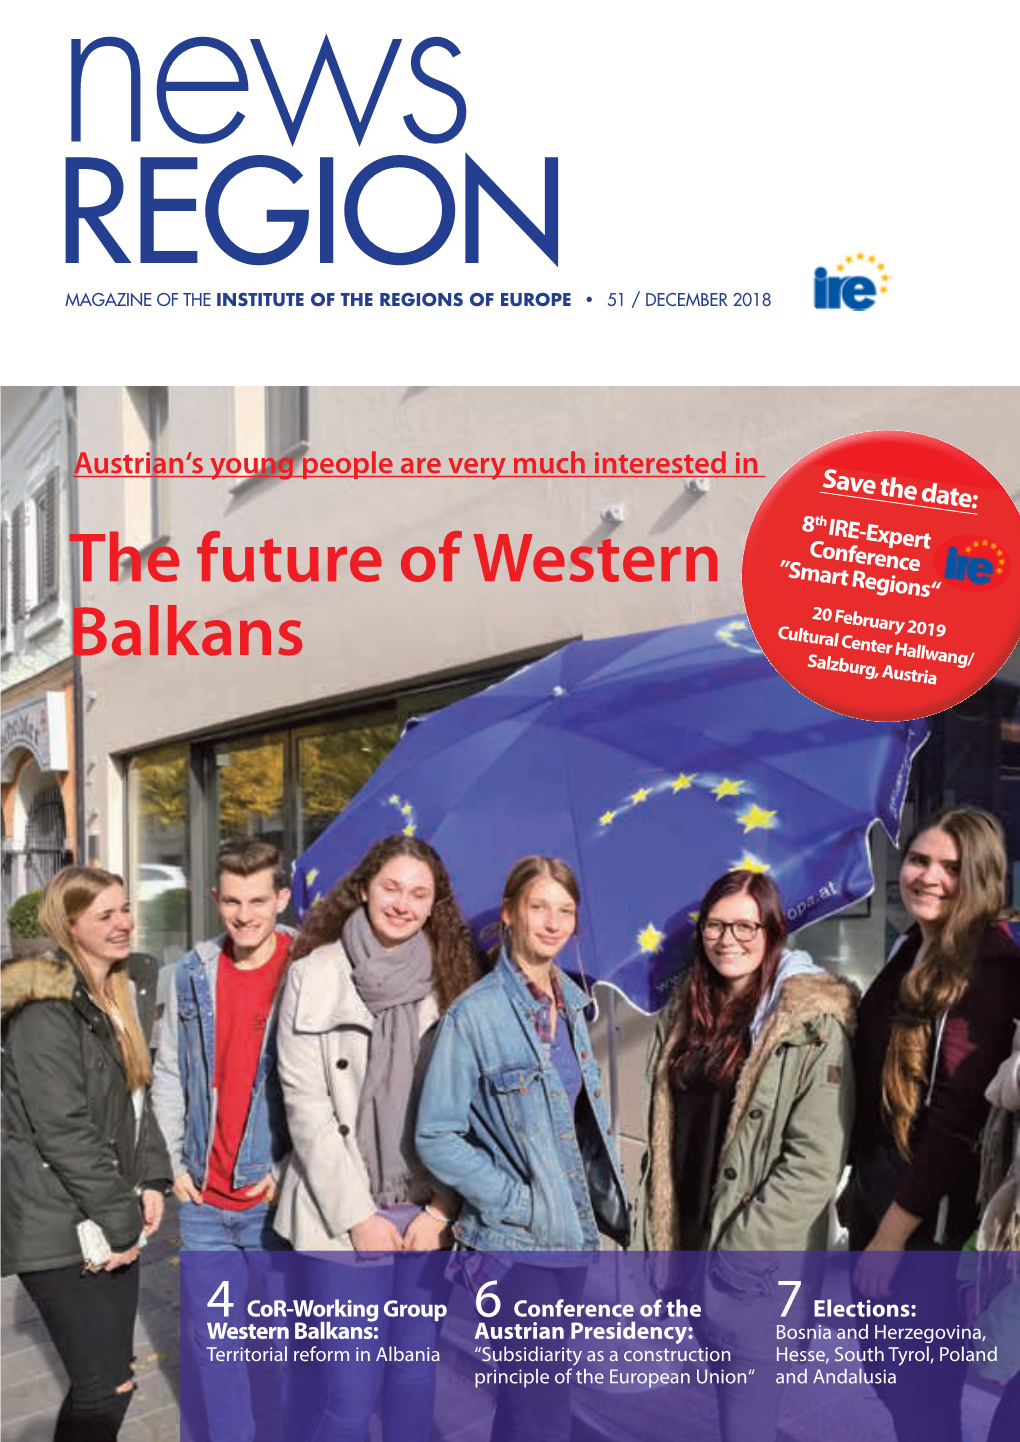 The Future of Western Balkans